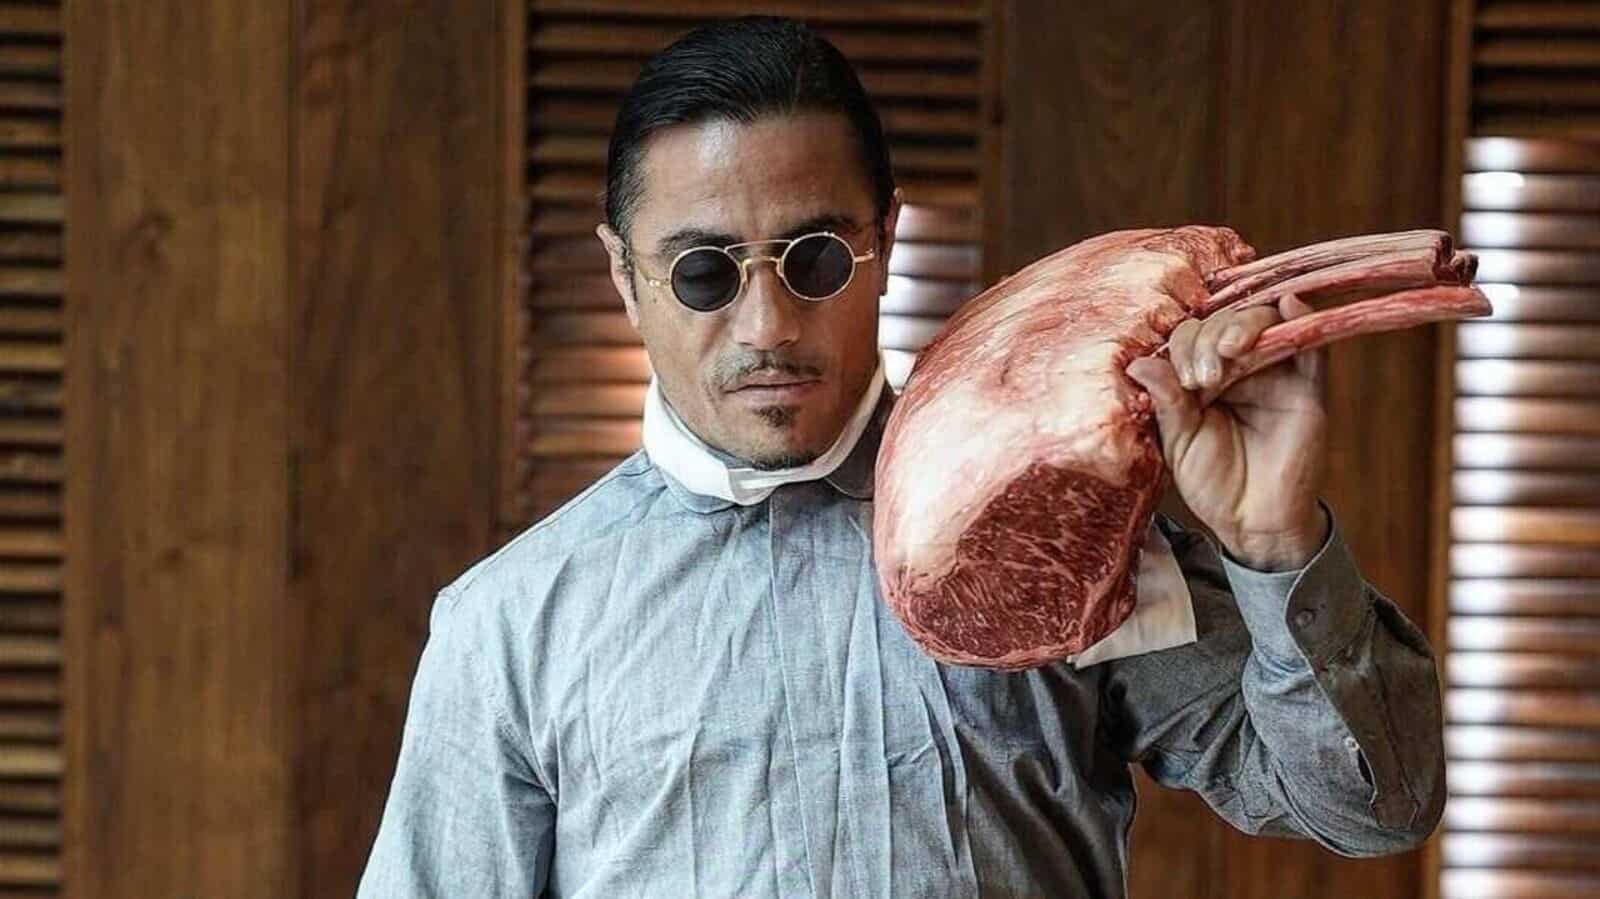 Salt Bae roasted for bragging about his restaurant prices